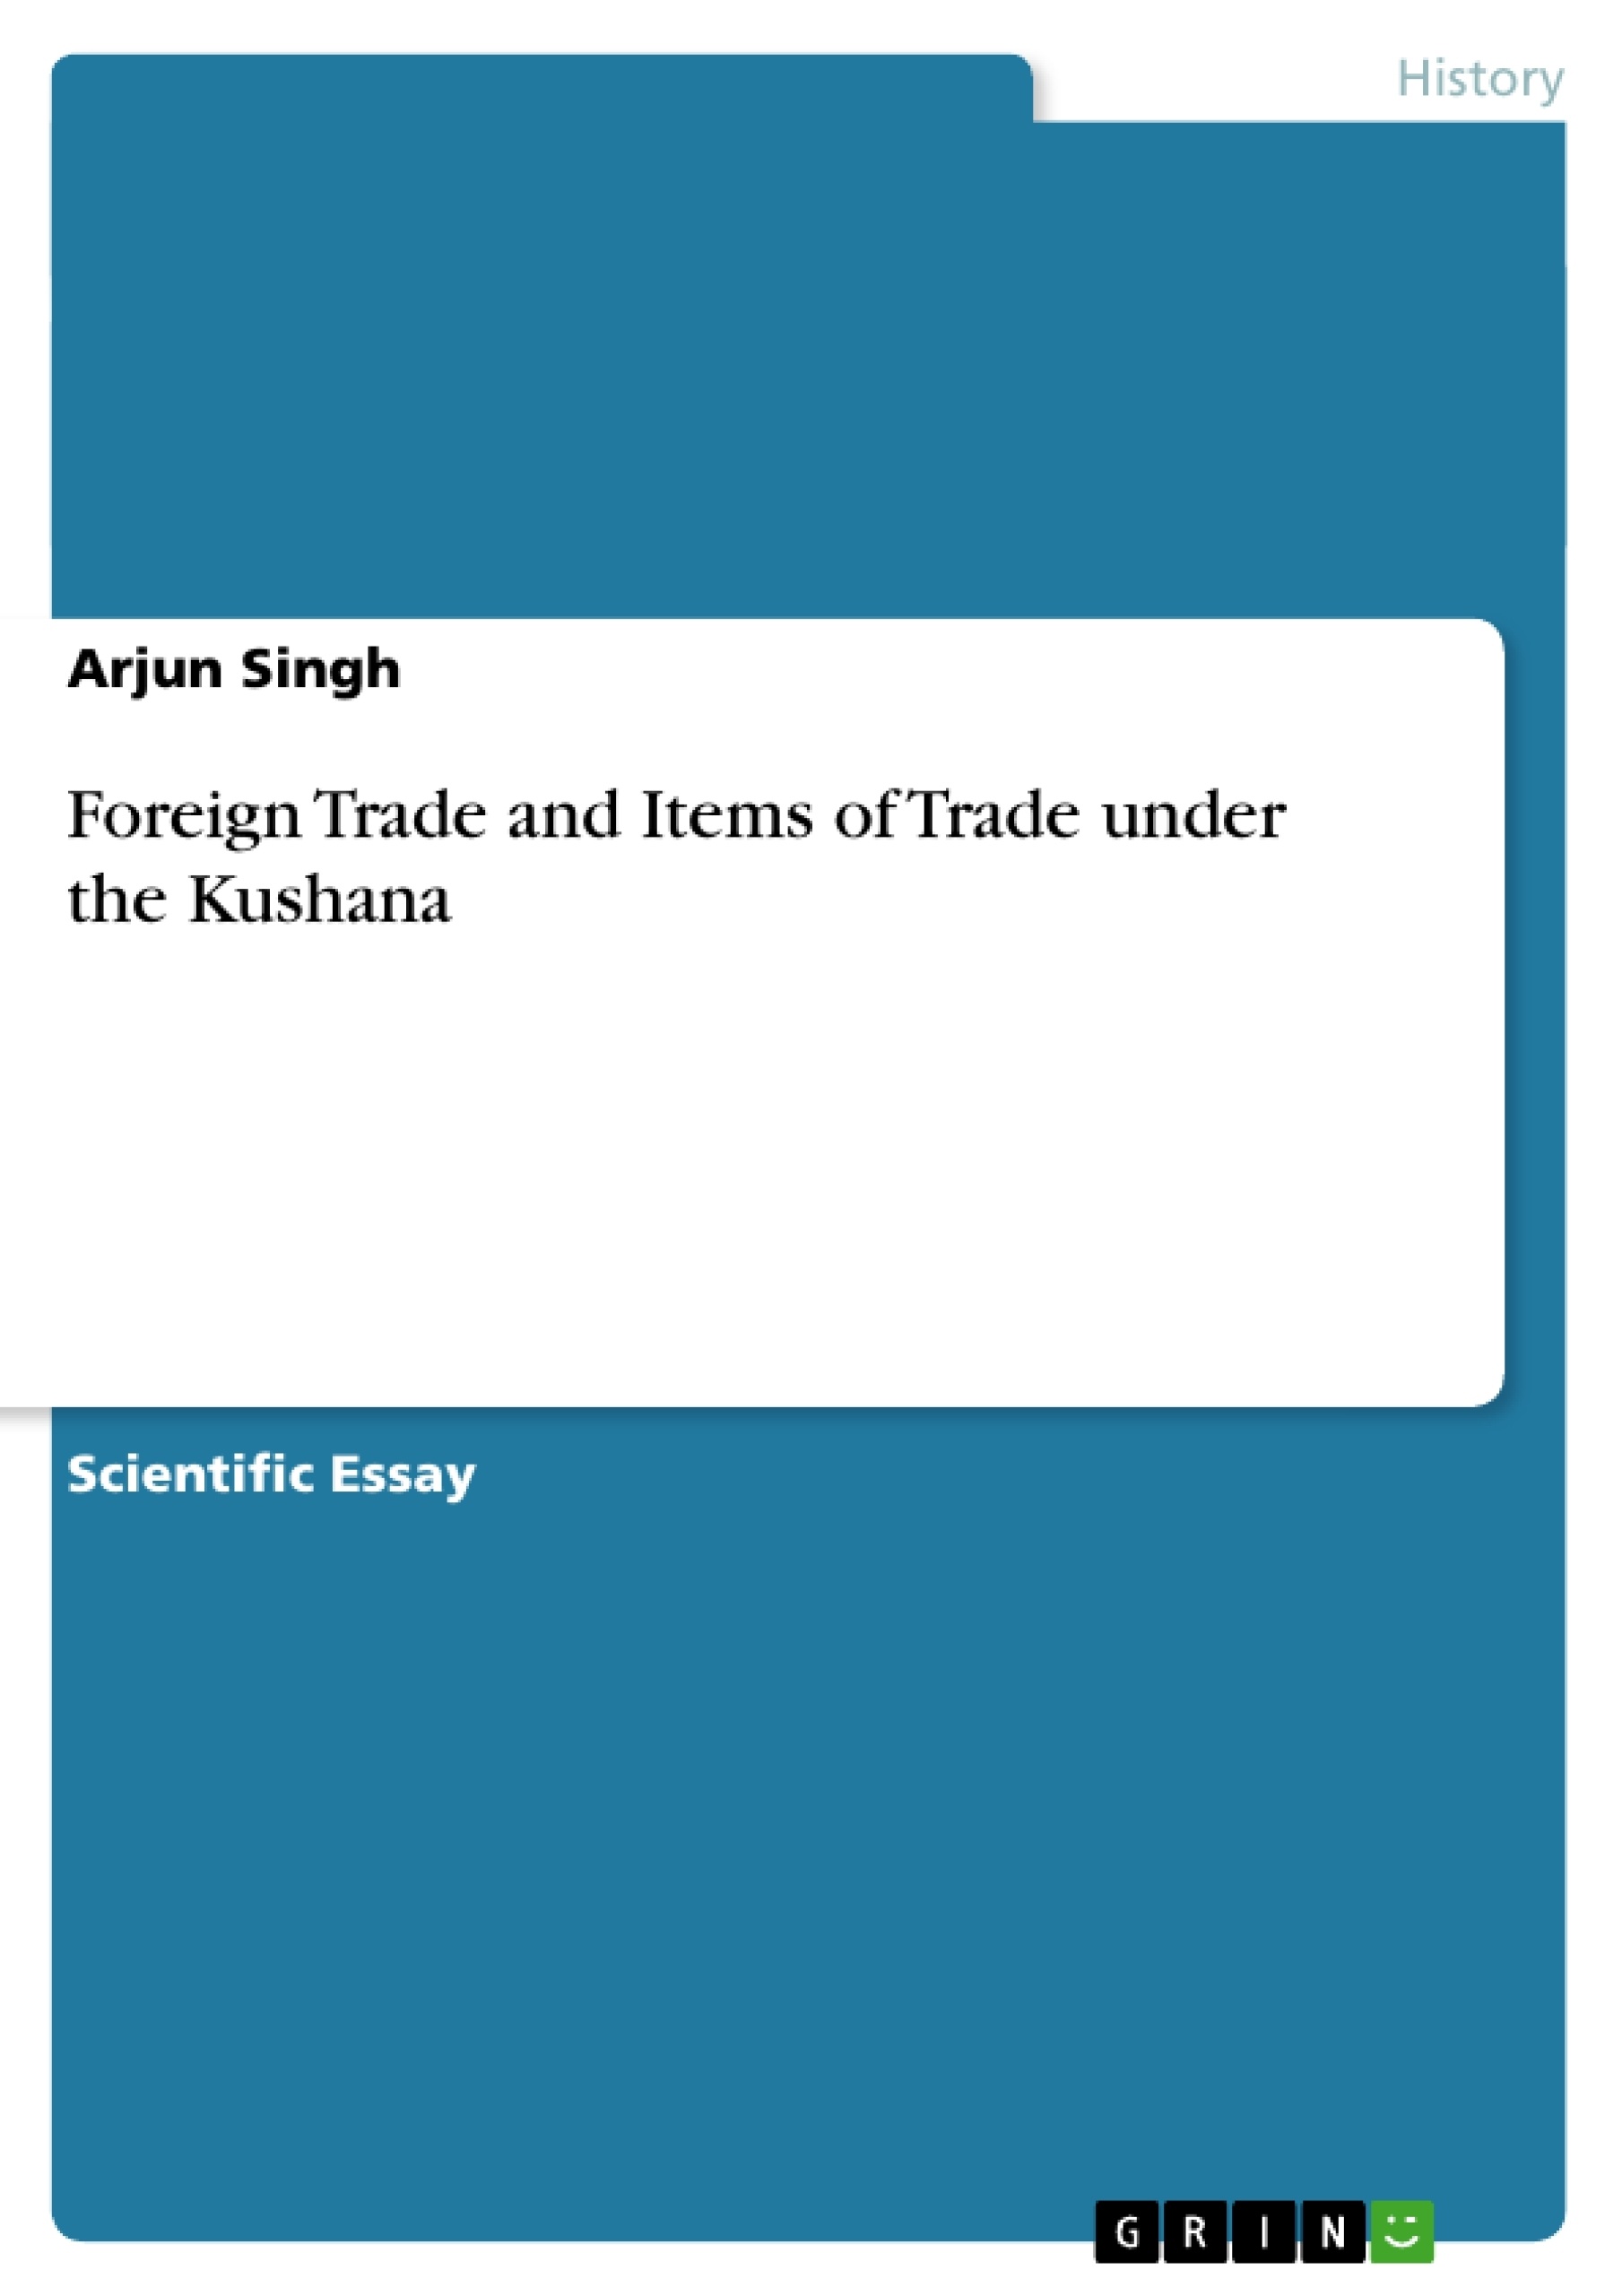 Titre: Foreign Trade and Items of Trade under the Kushana